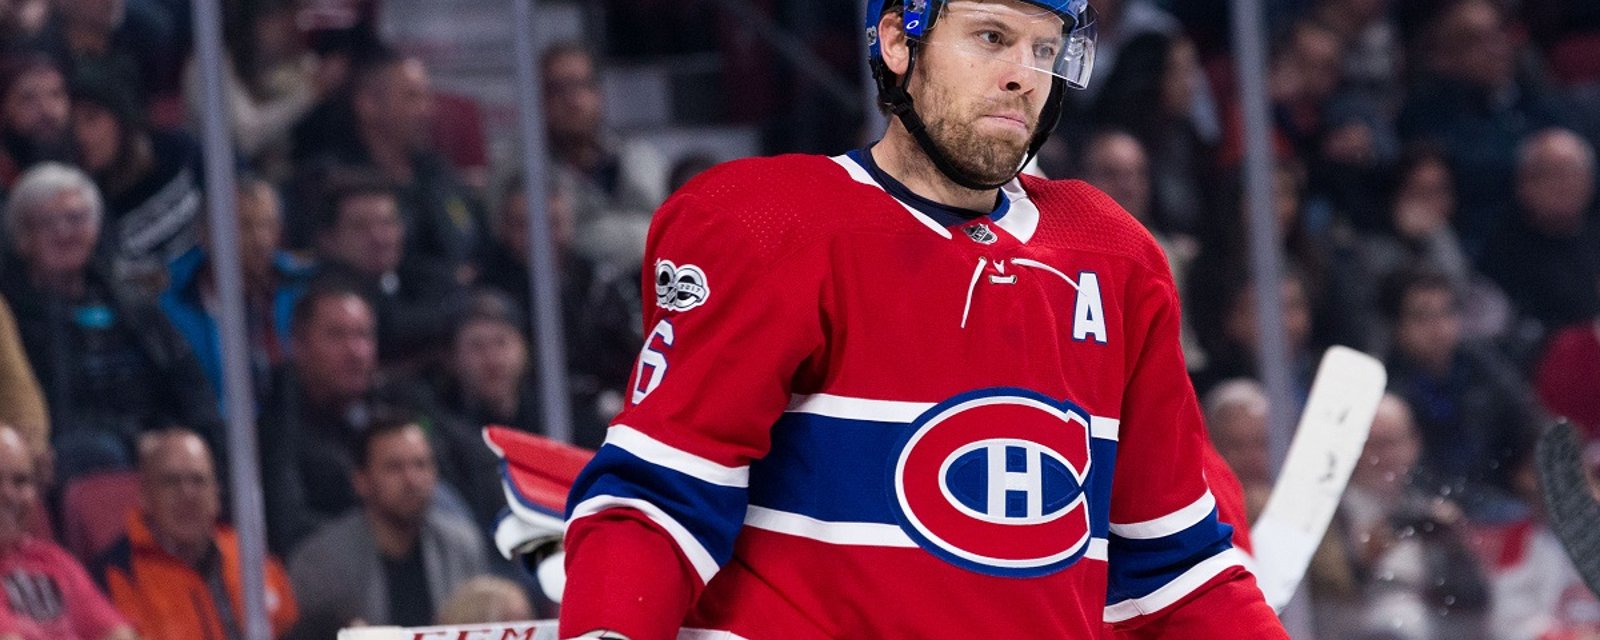 Update on Weber and line up changes coming out of Habs practice on Monday.